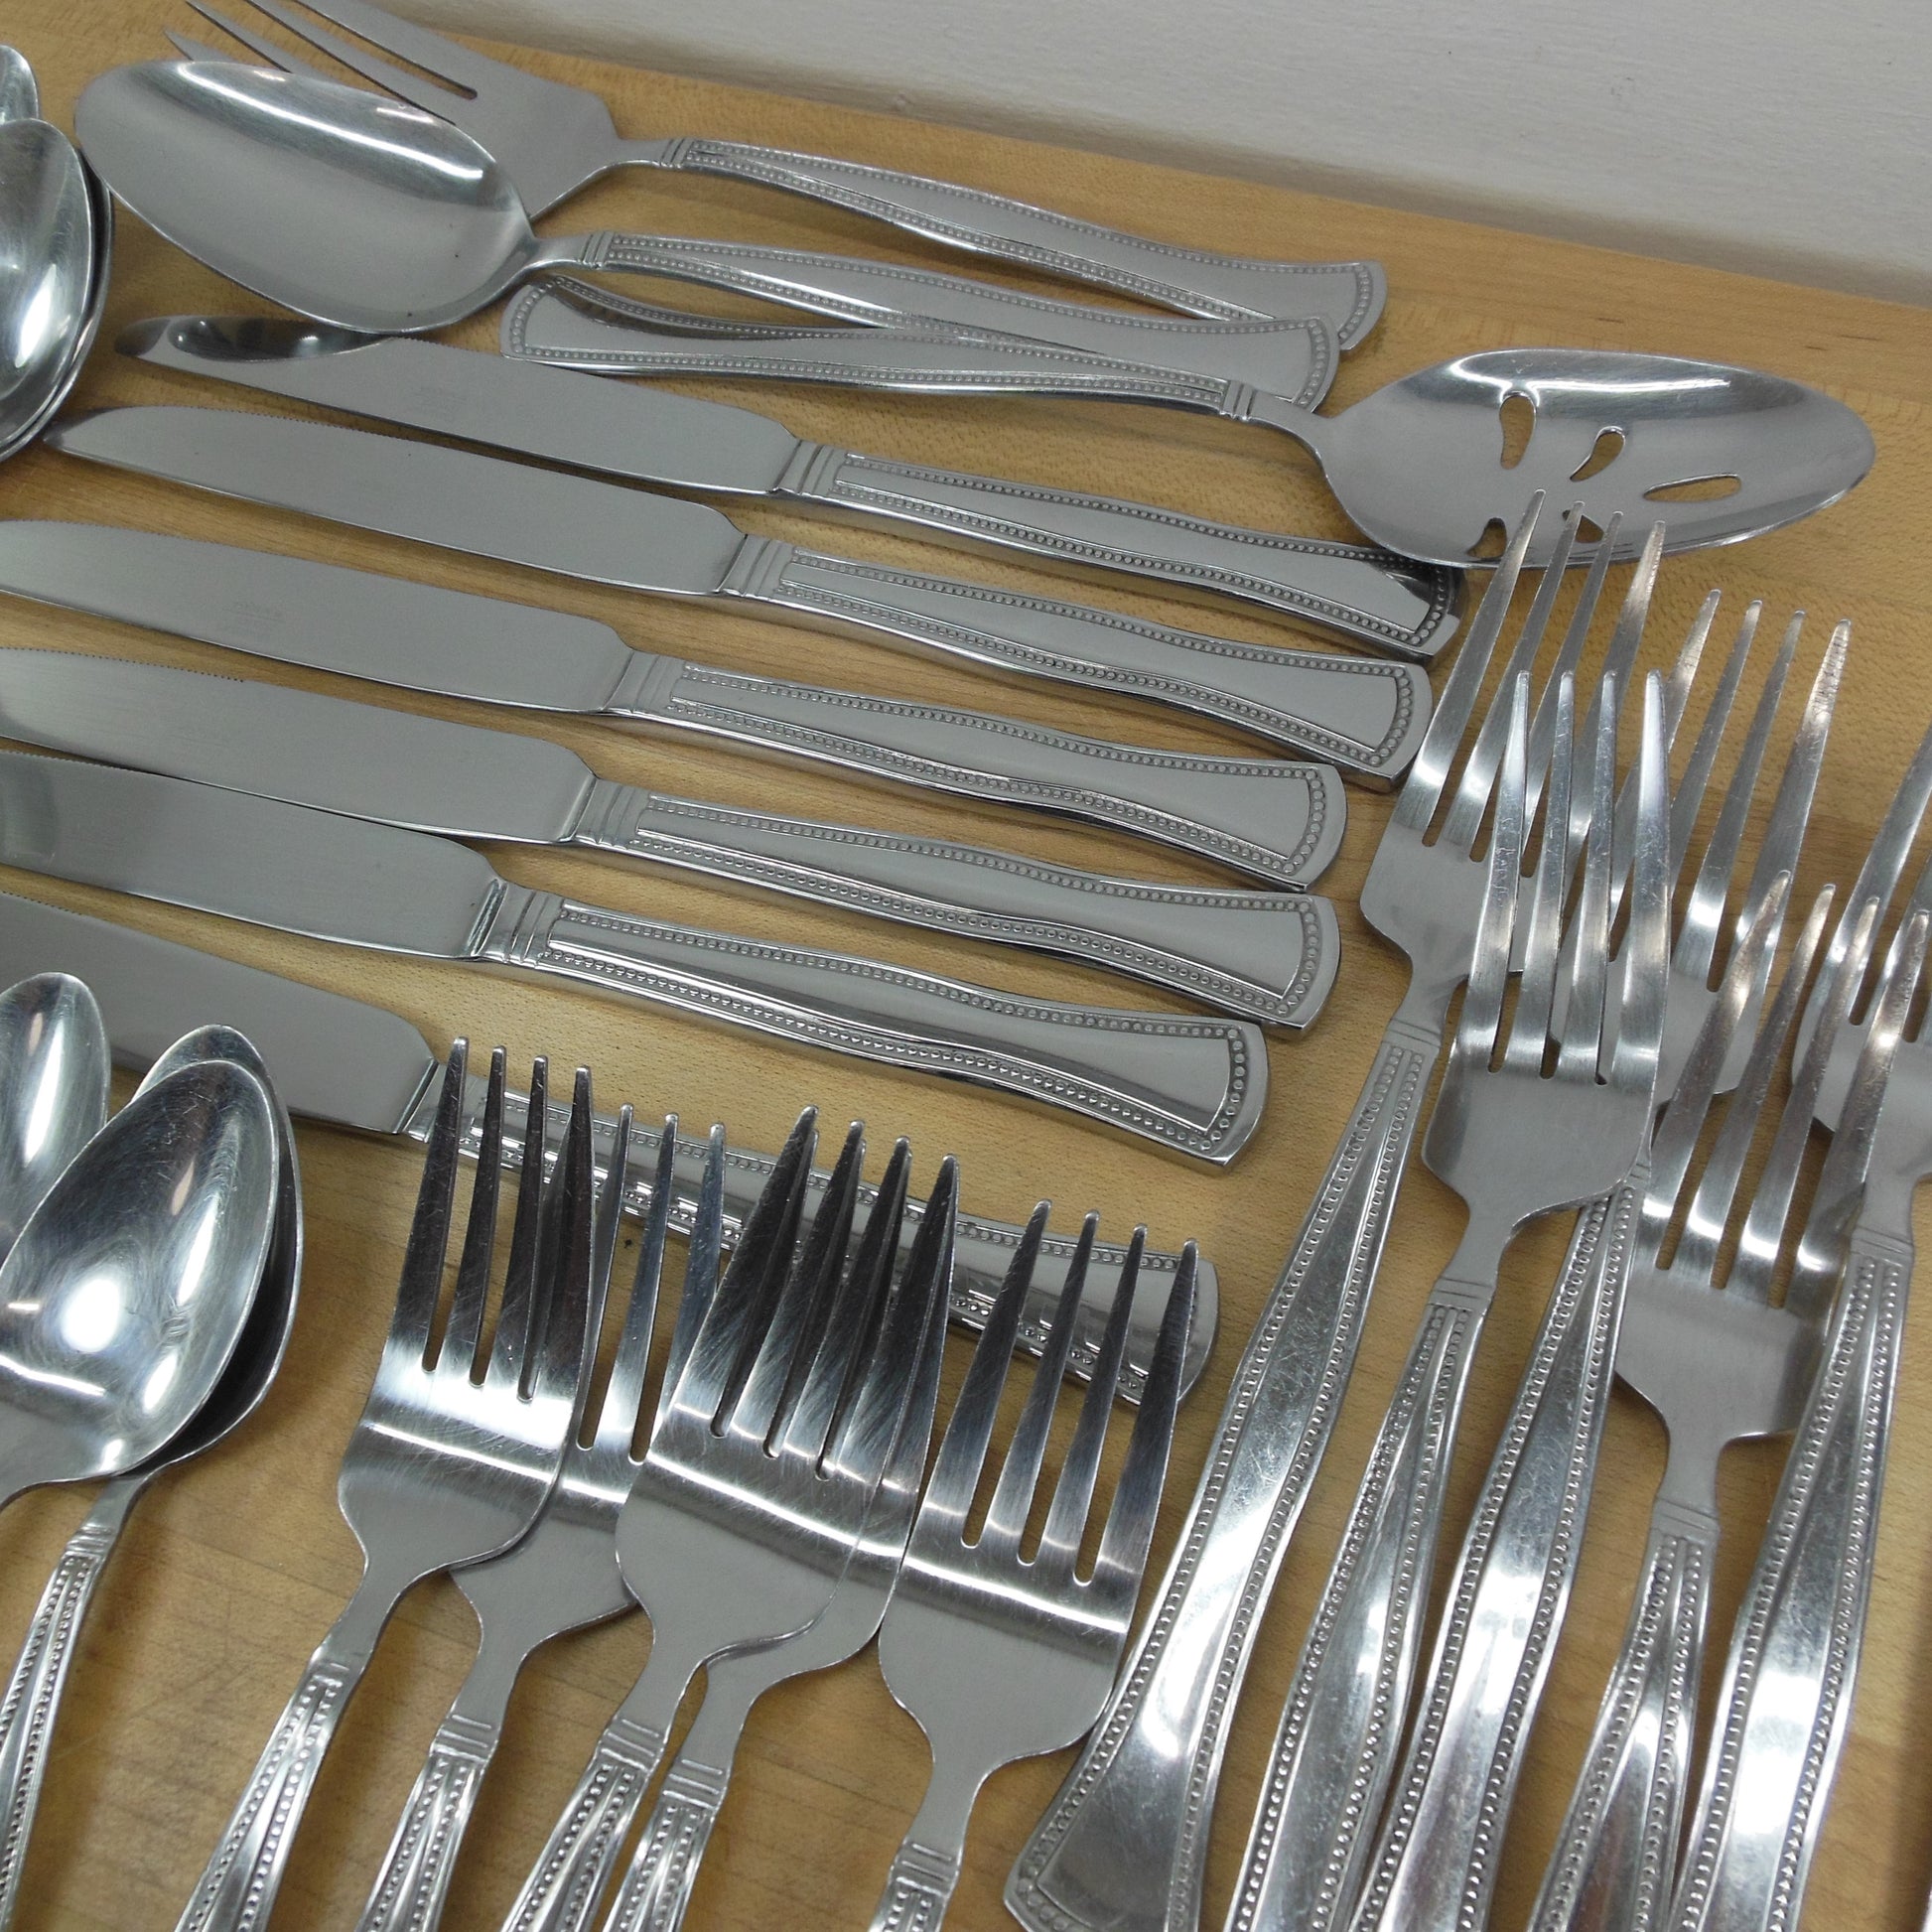 Mikasa Chadwick Bead Stainless Flatware Partial Set - 33 Pieces Used